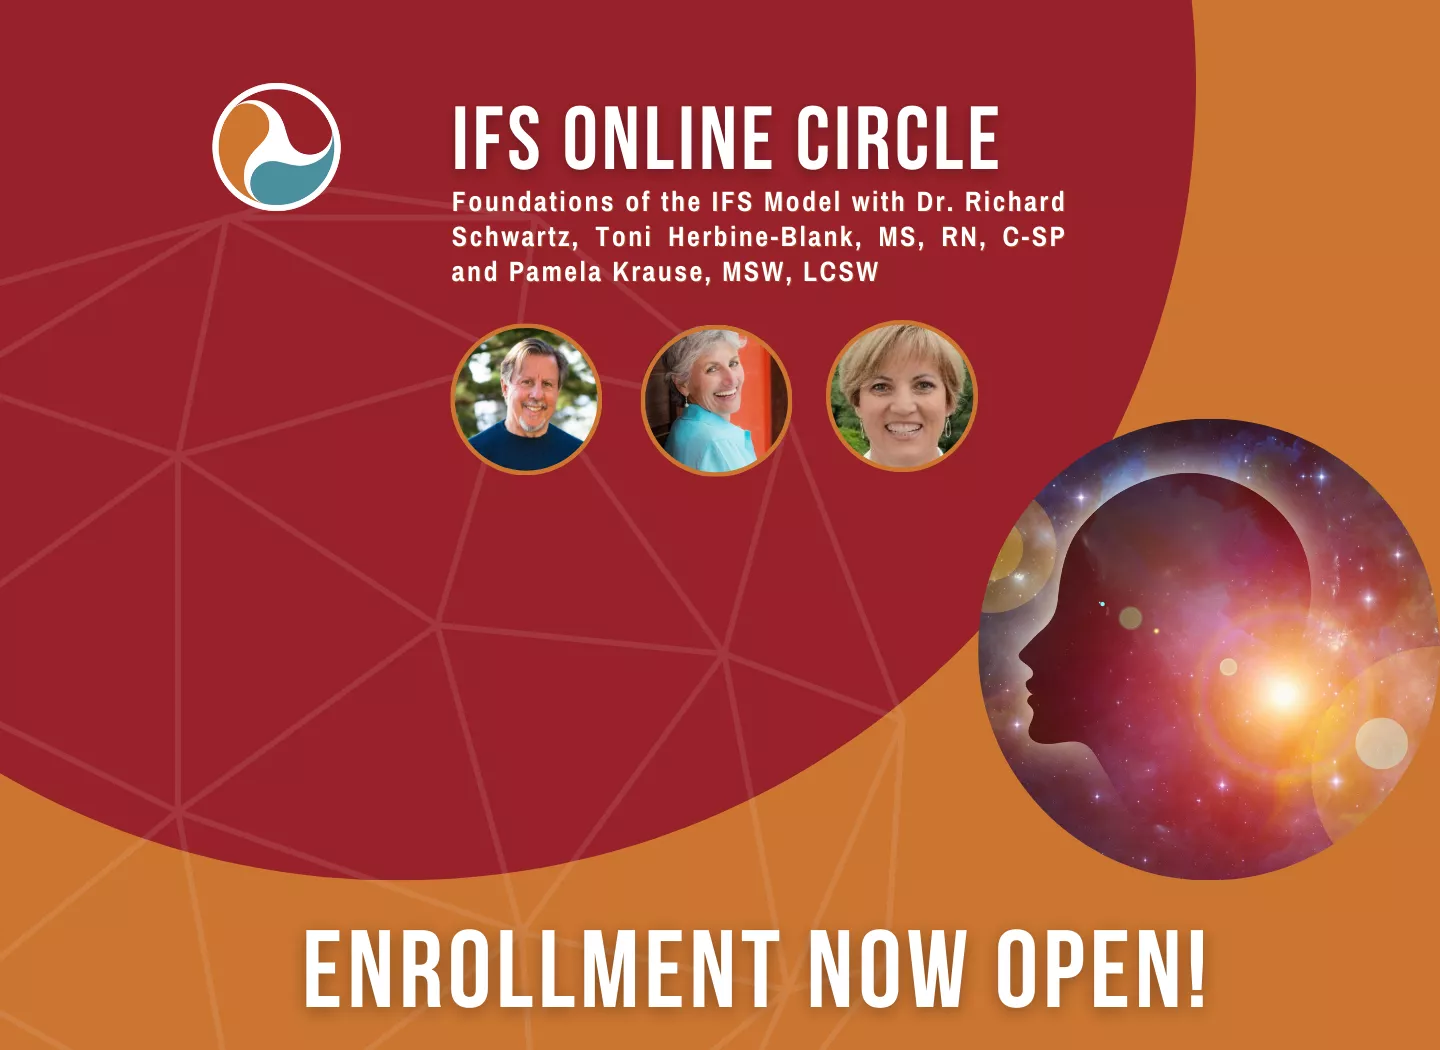 image of red and orange icons with text that reads IFS Online Circle, headshots of Dick Schwartz, Toni Herbine-Blank and Pam Krause. Text also reads Enrollment now open